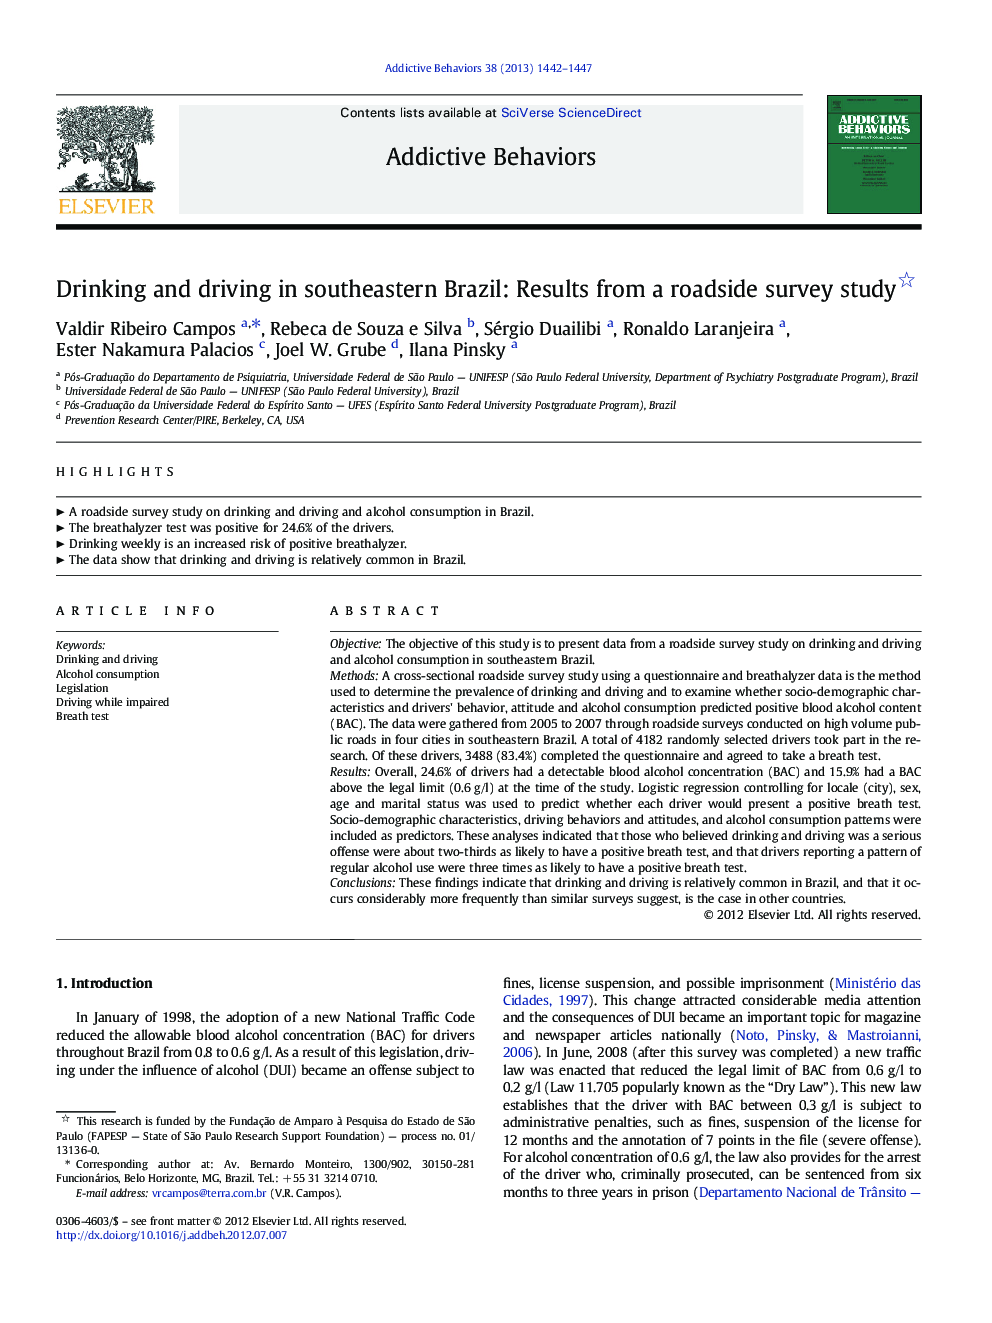 Drinking and driving in southeastern Brazil: Results from a roadside survey study 